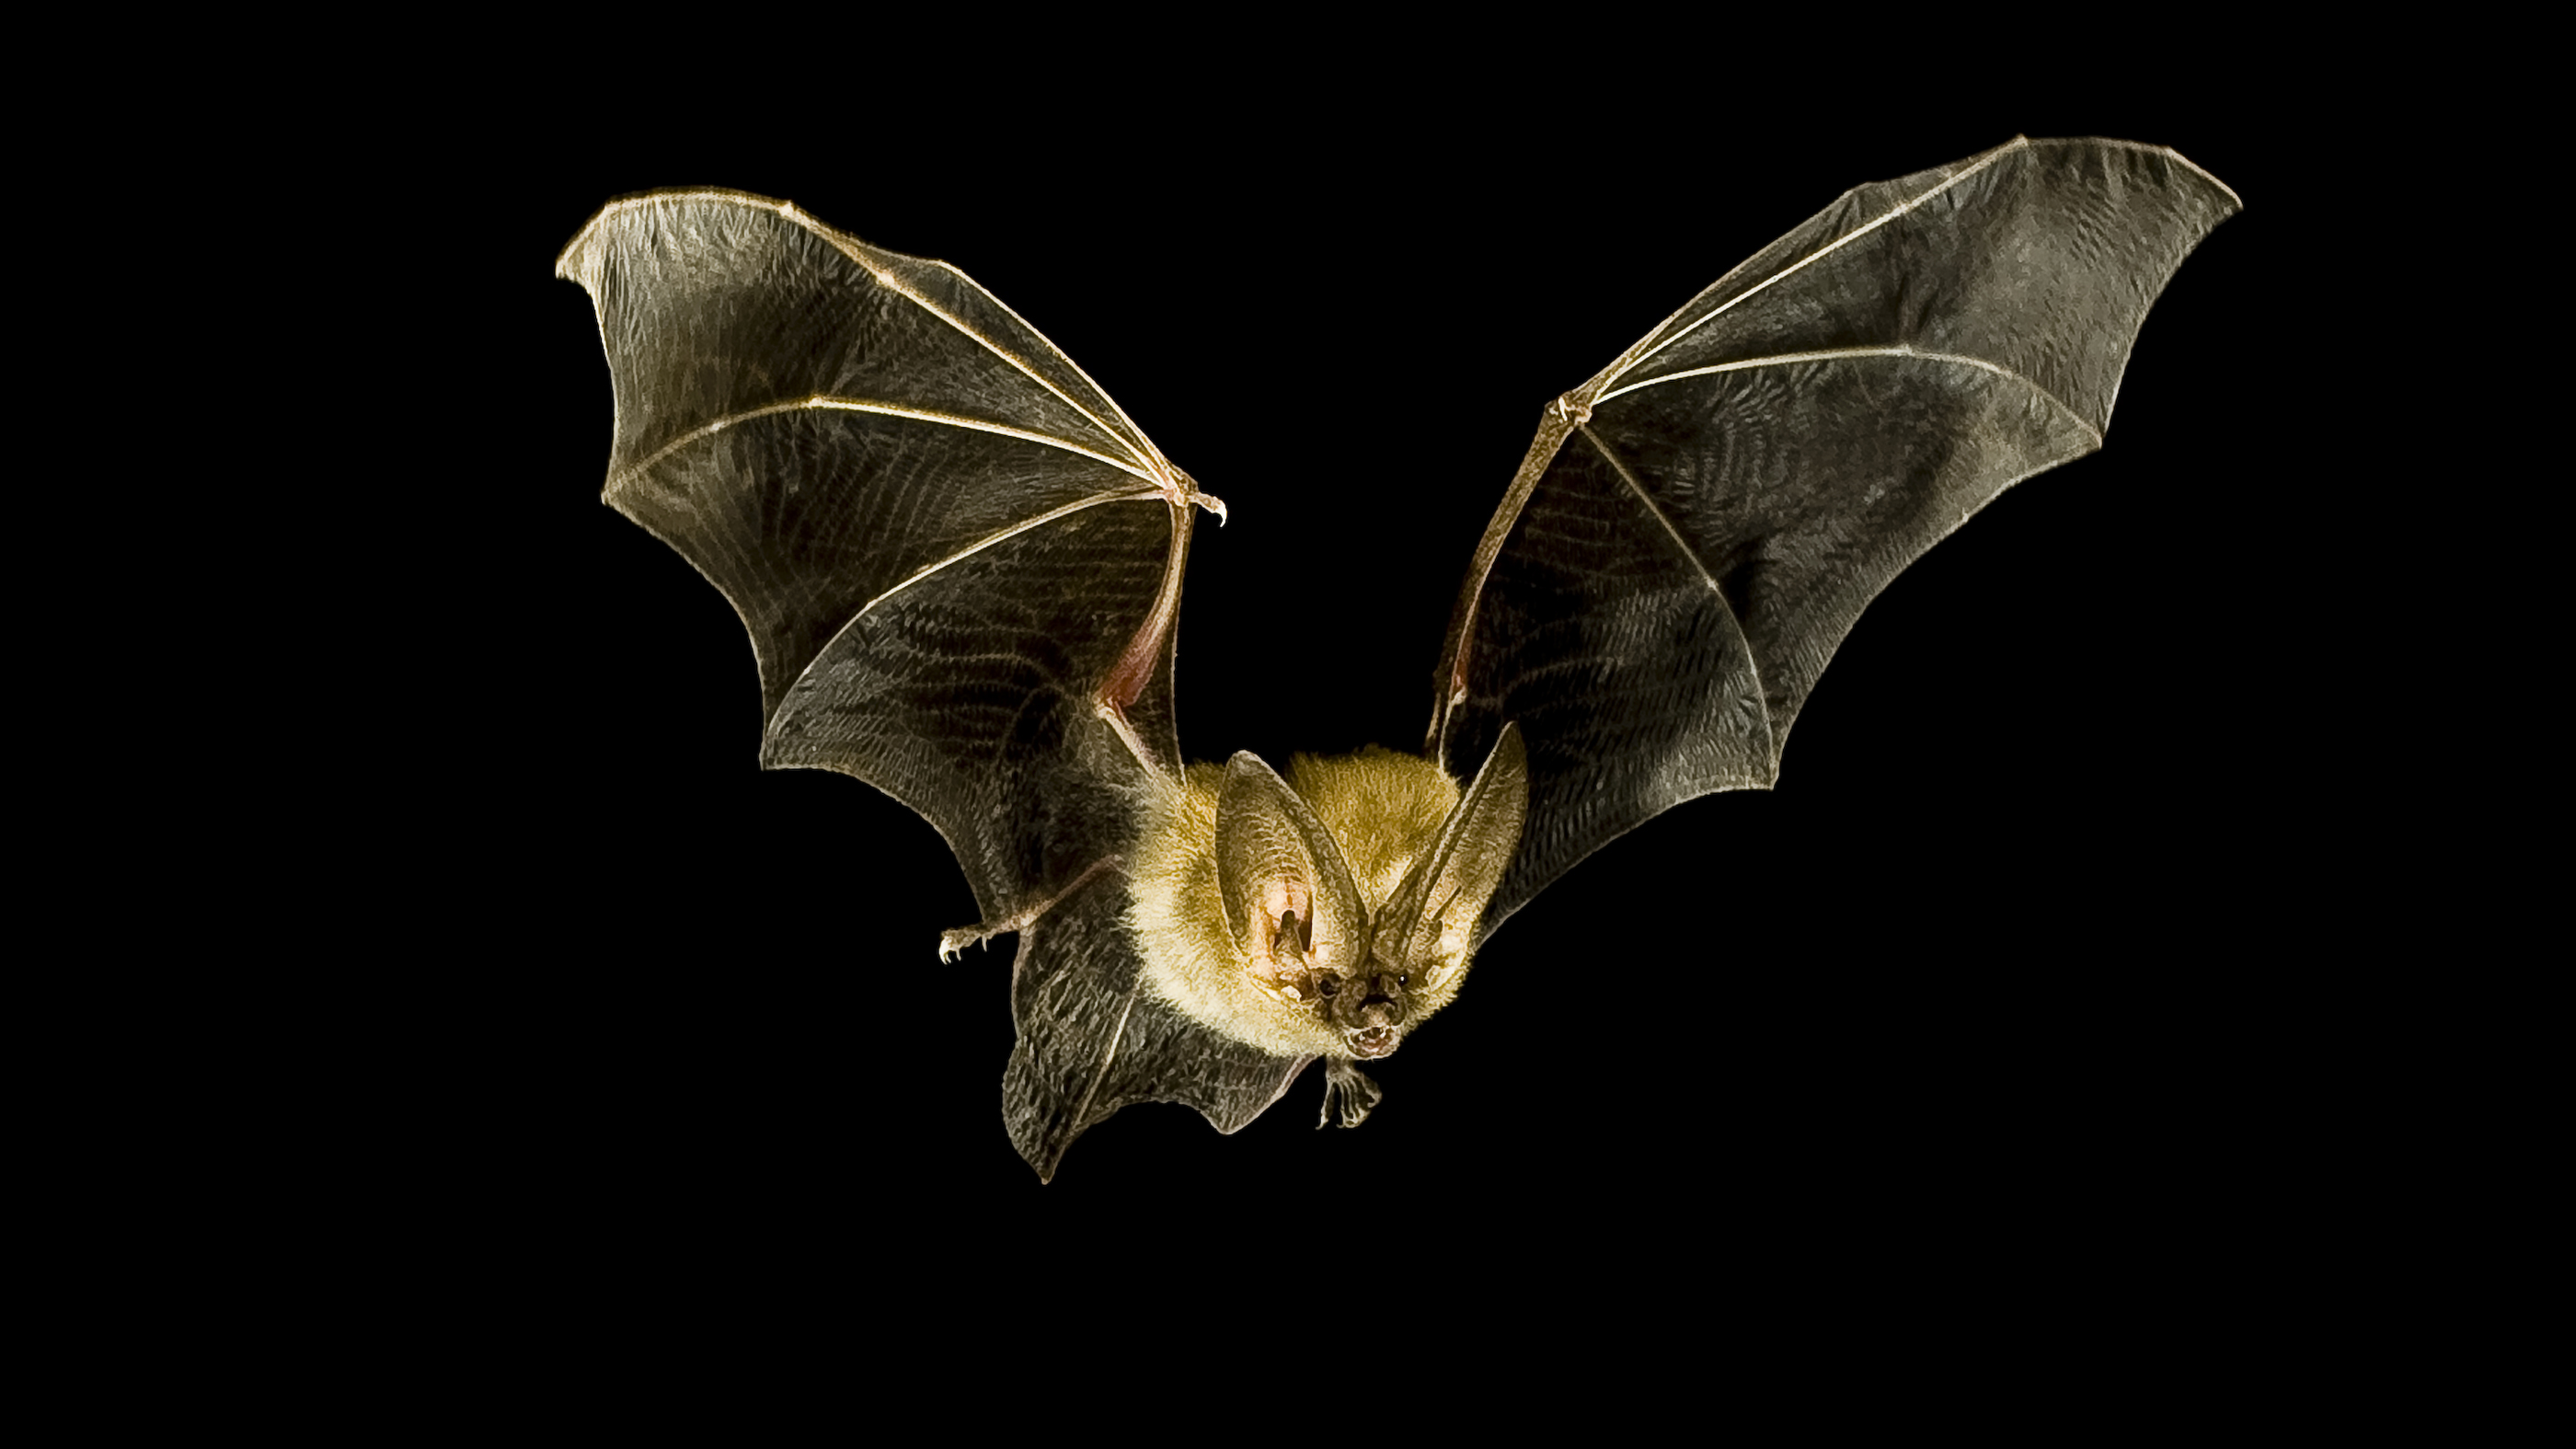 Bats are superheroes of the night. Their superpowers could help us protect  them.